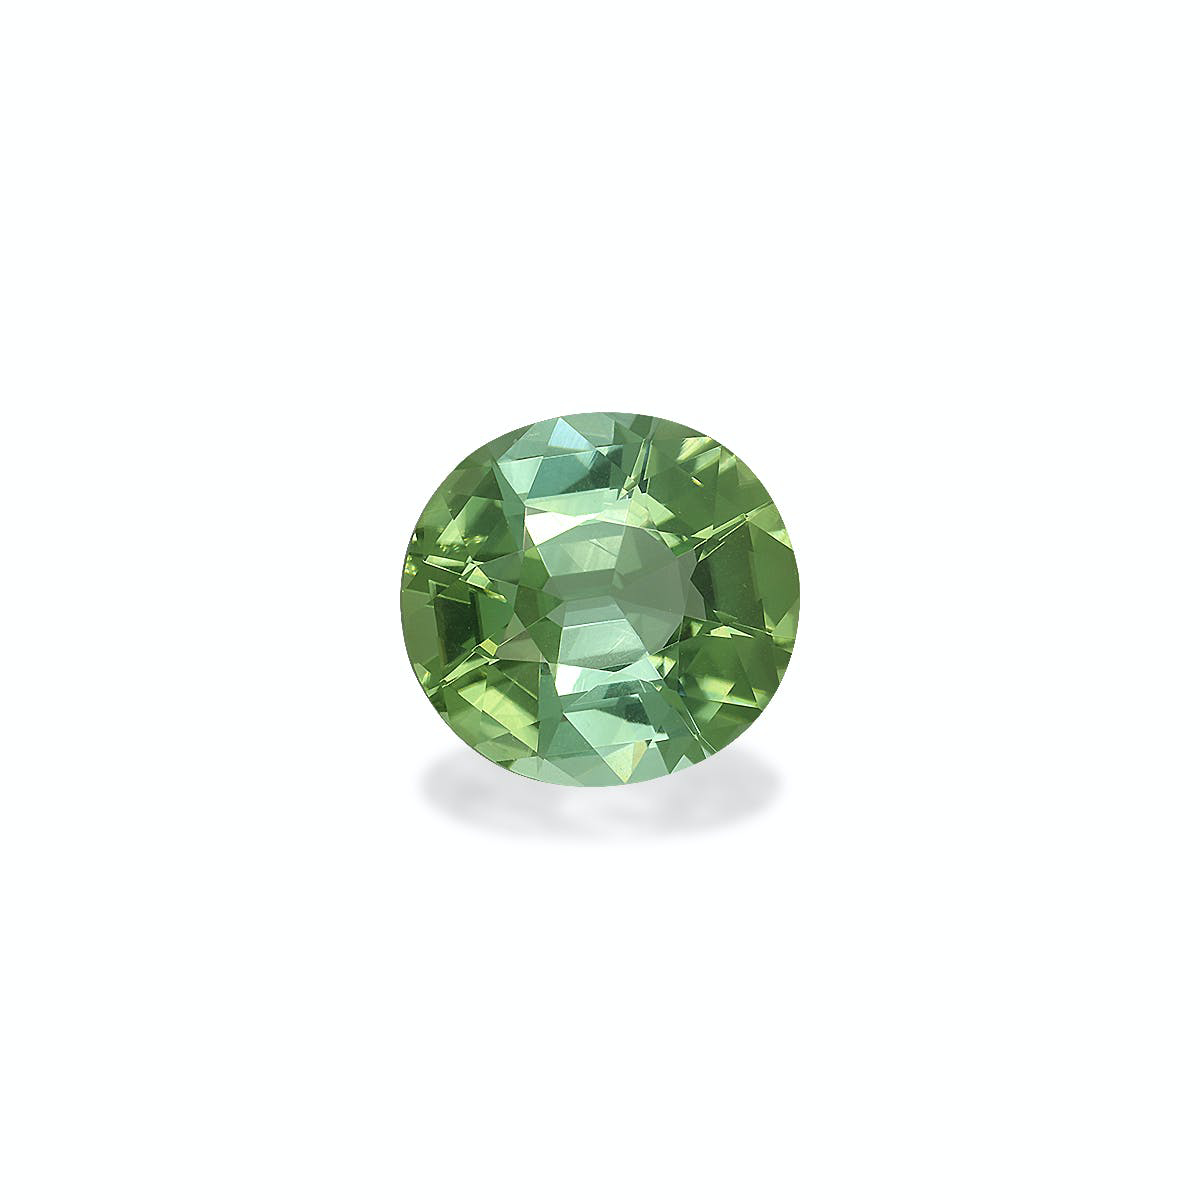 Picture of Green Tourmaline 8.92ct (TG0633)